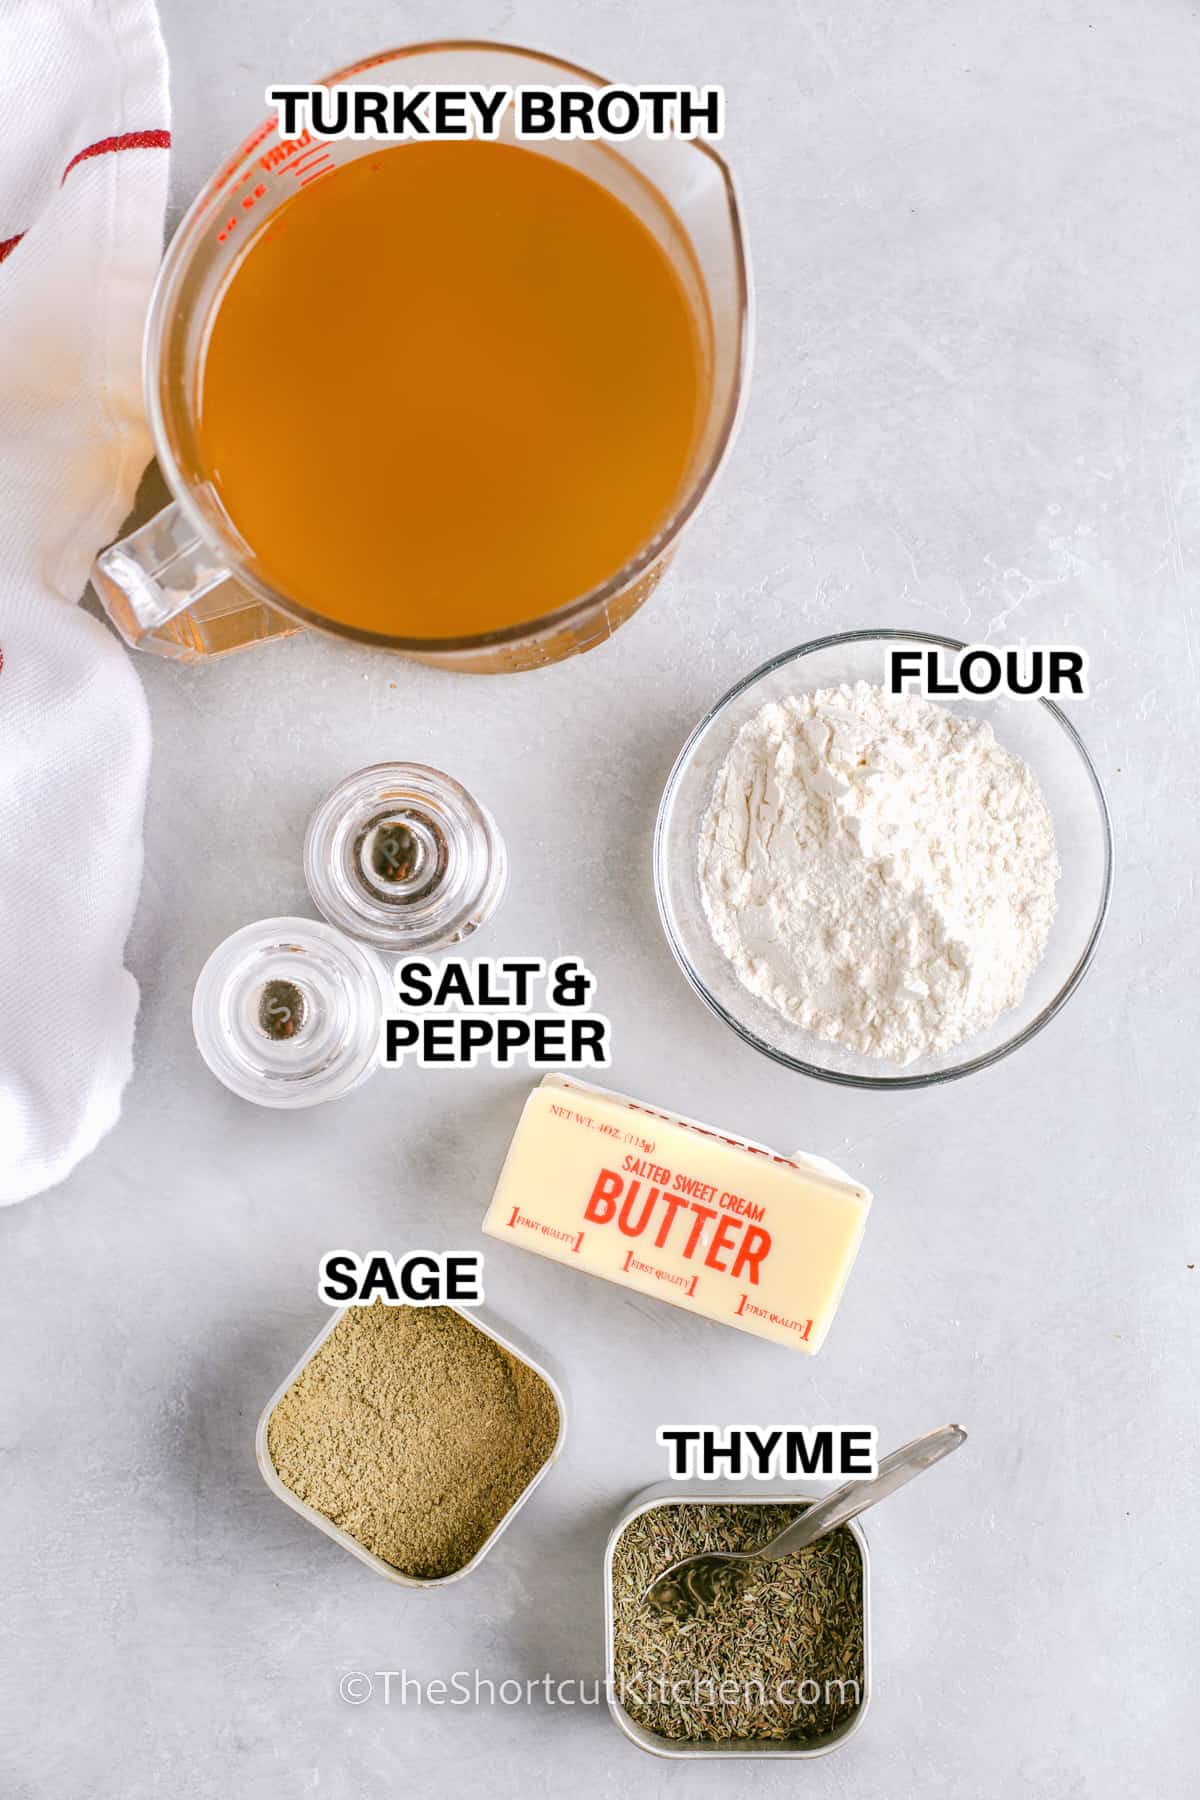 ingredients to make turkey gravy without drippings including turkey broth, butter, flour, salt & pepper, sage, & thyme